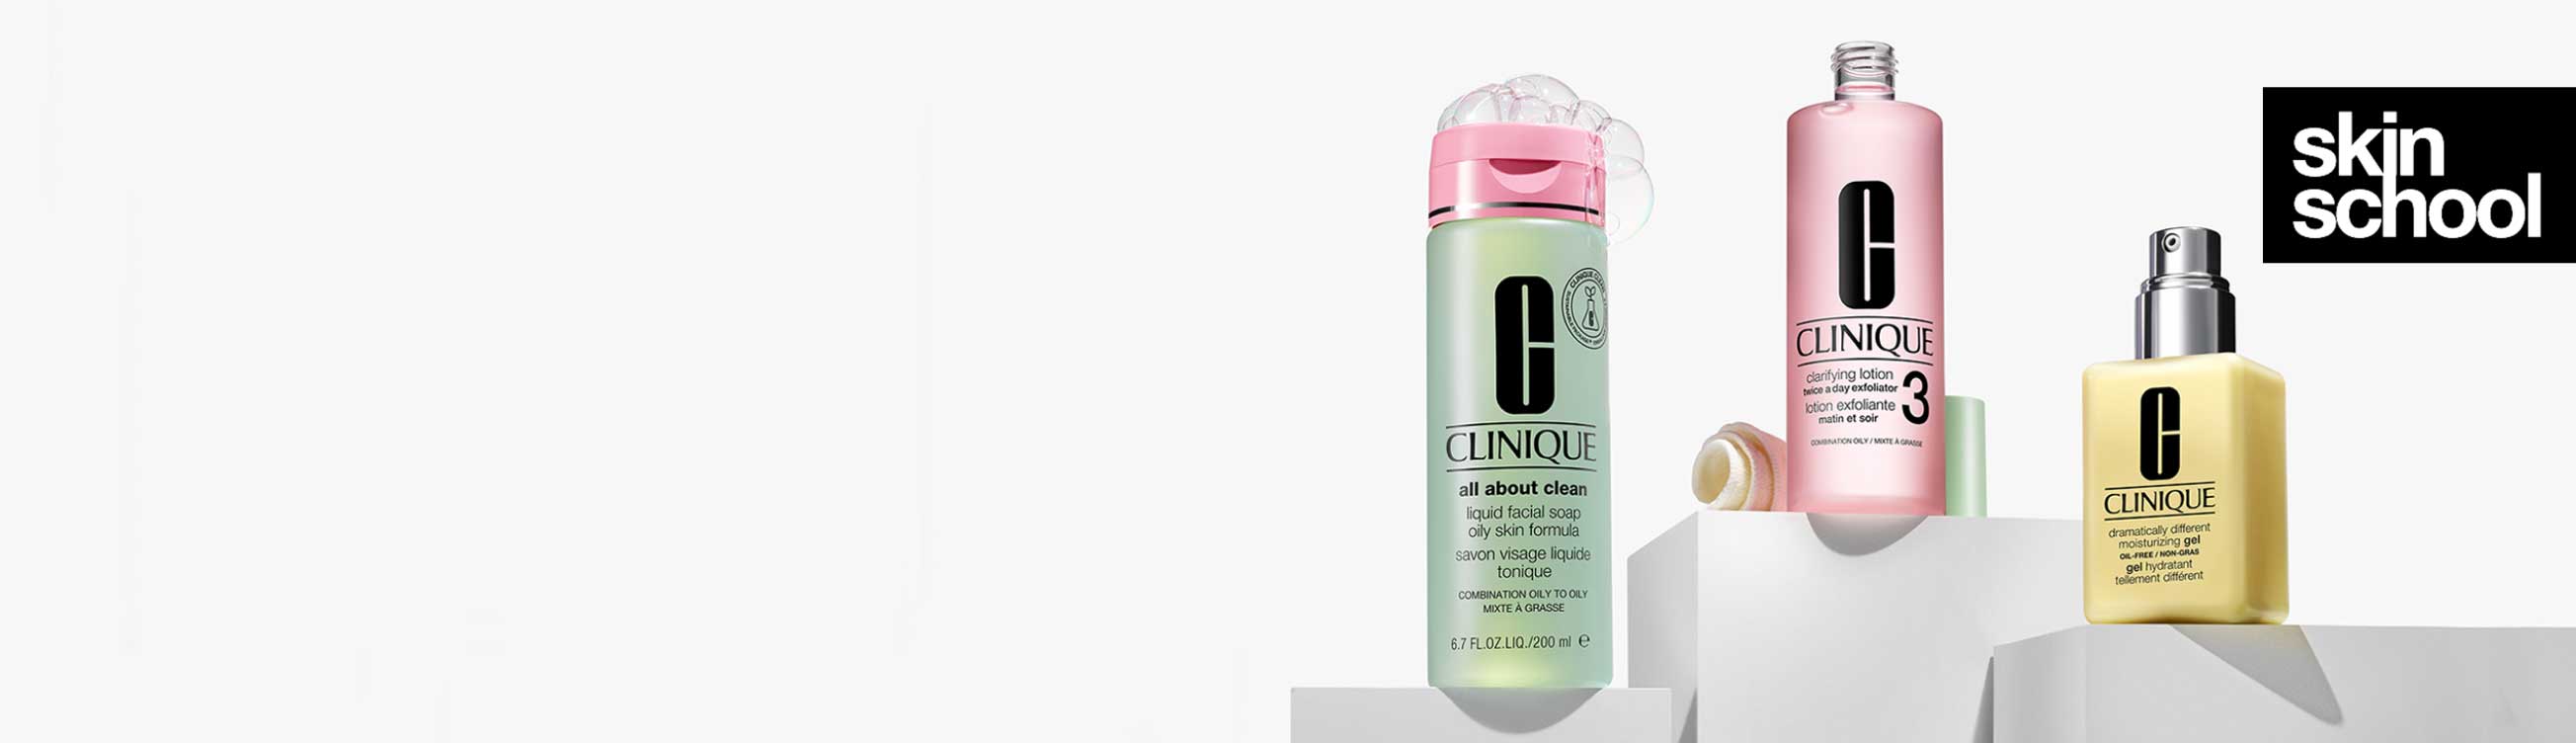 Dramatically Different™ Moisturizing Lotion+ | Clinique